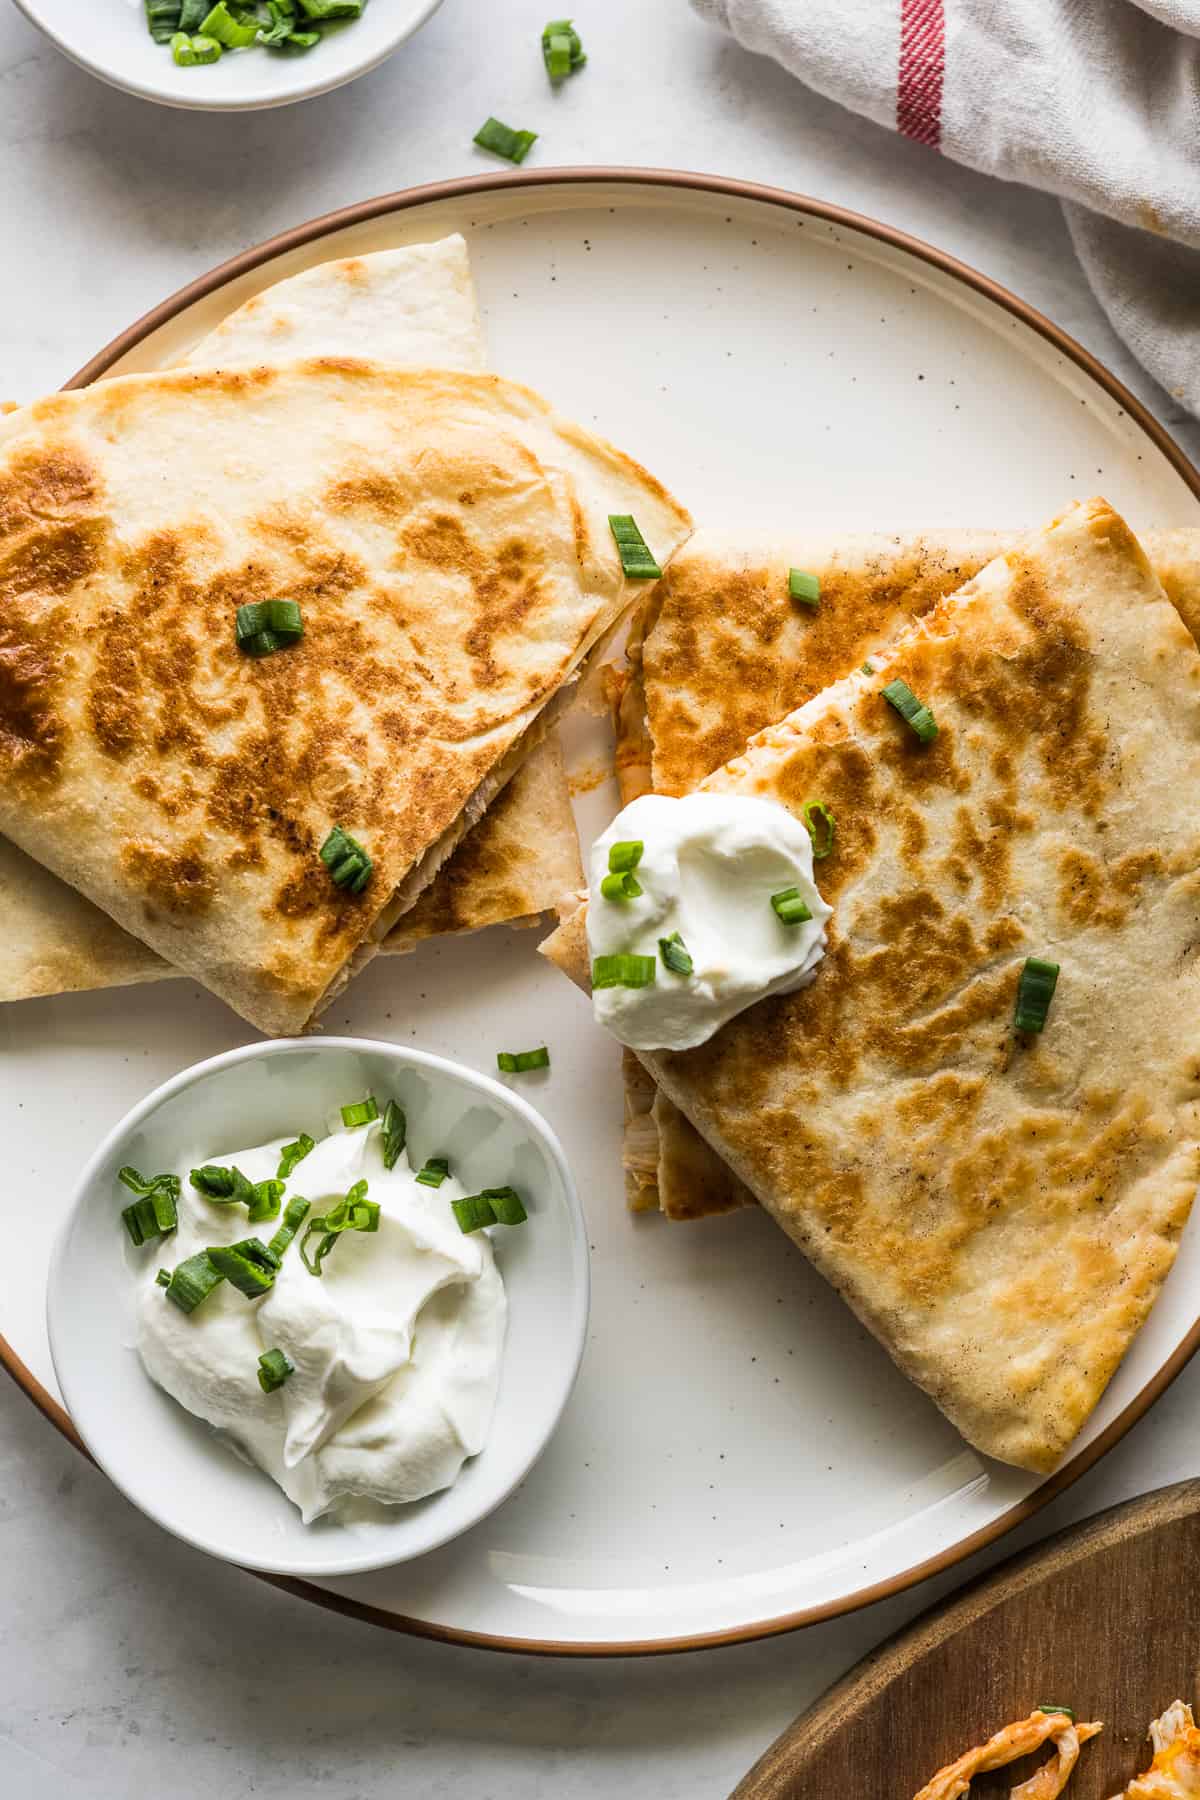 Buffalo chicken quesadillas on a plate served with sour cream.